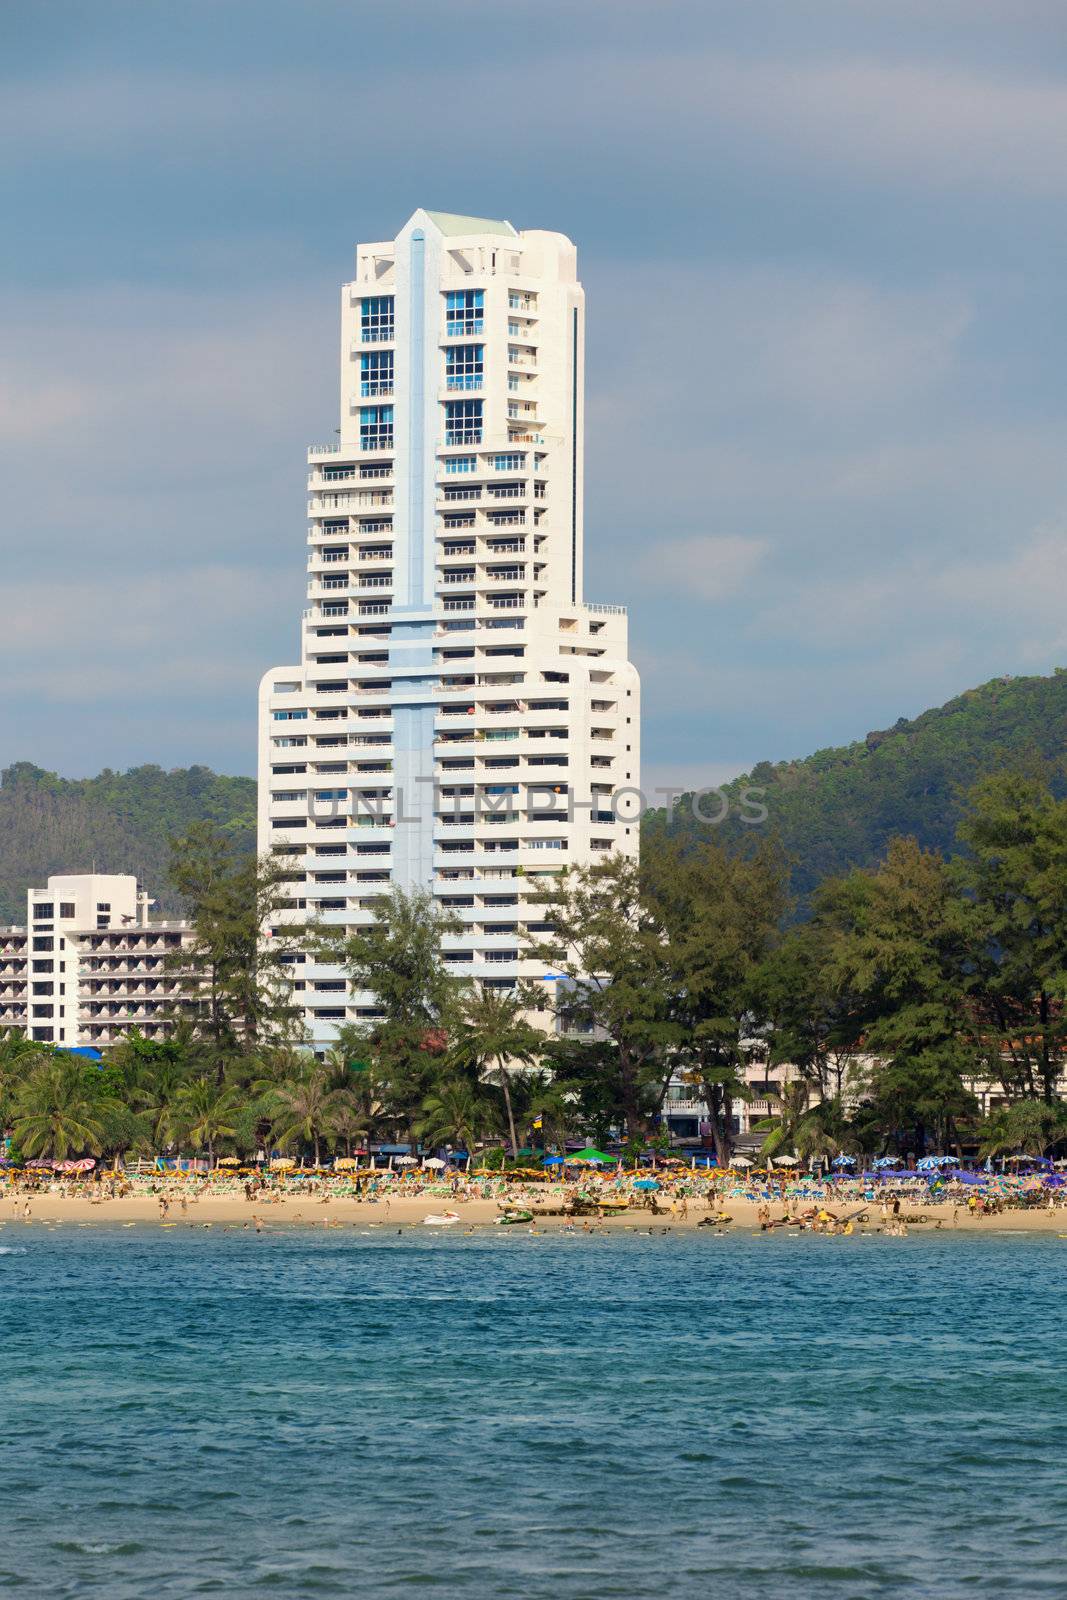 Large high-rise hotel on the tropical ocean. Thailand, Phuket, Patong.